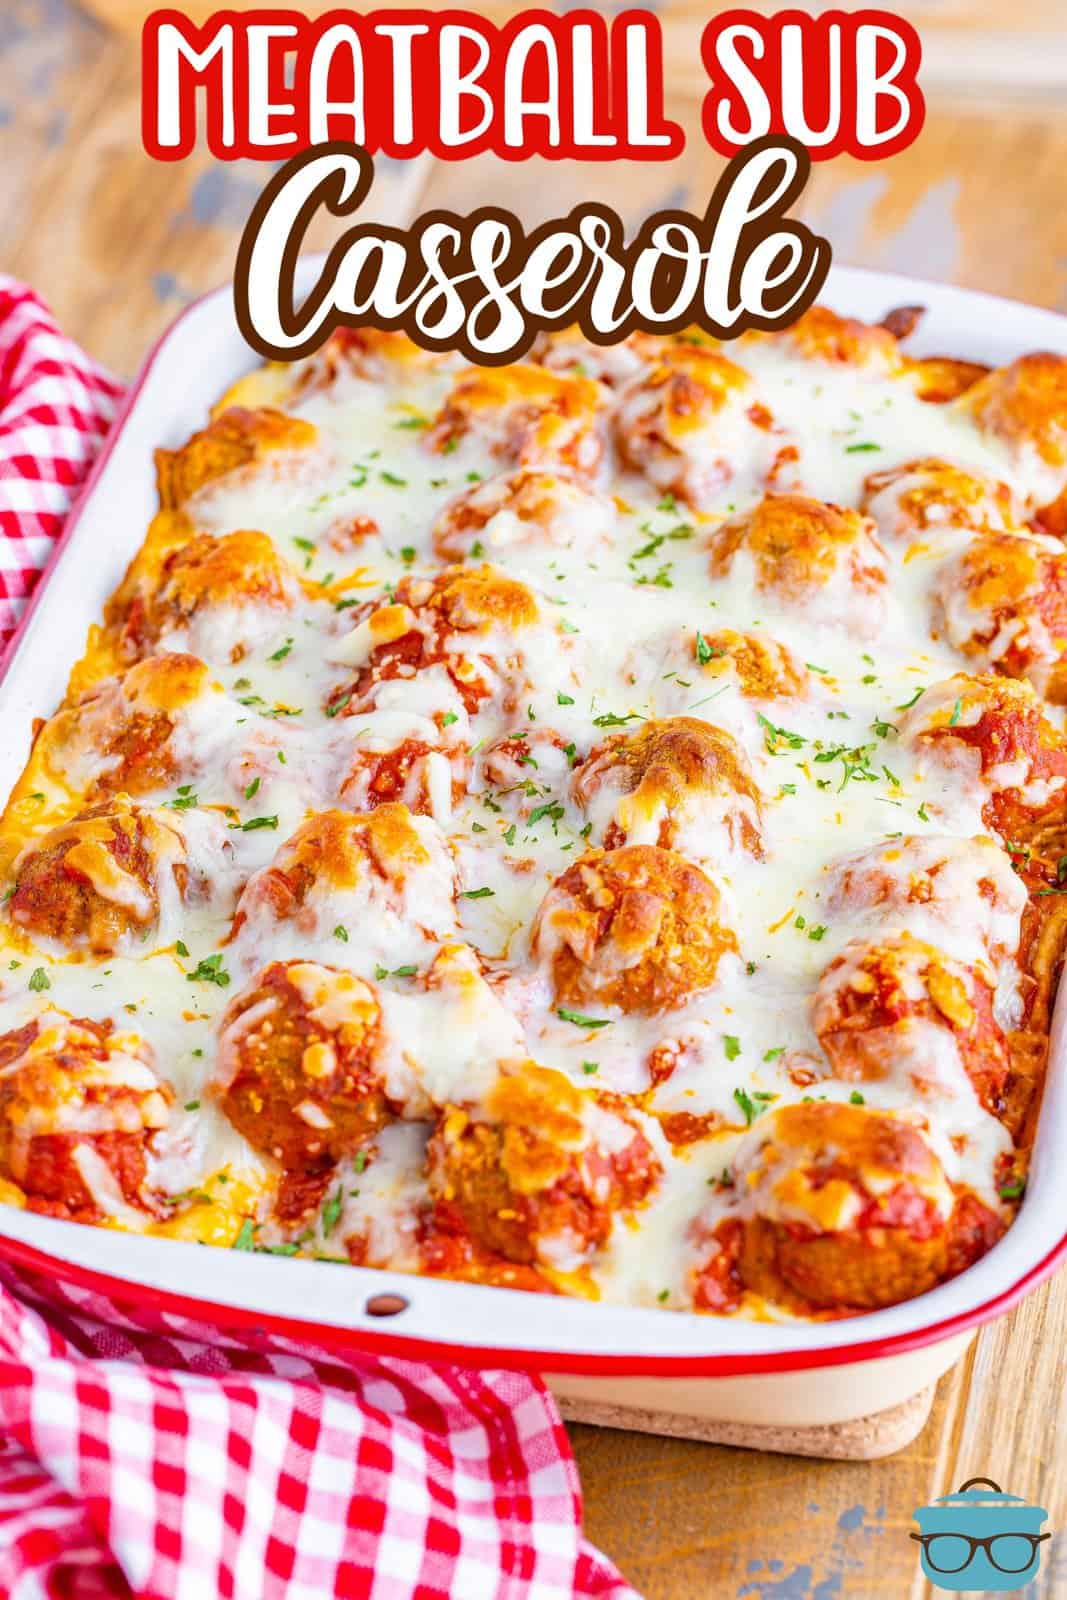 Meatball Sub Casserole shown fully baked in a white and red casserole dish with a red and white dishcloth on the side.